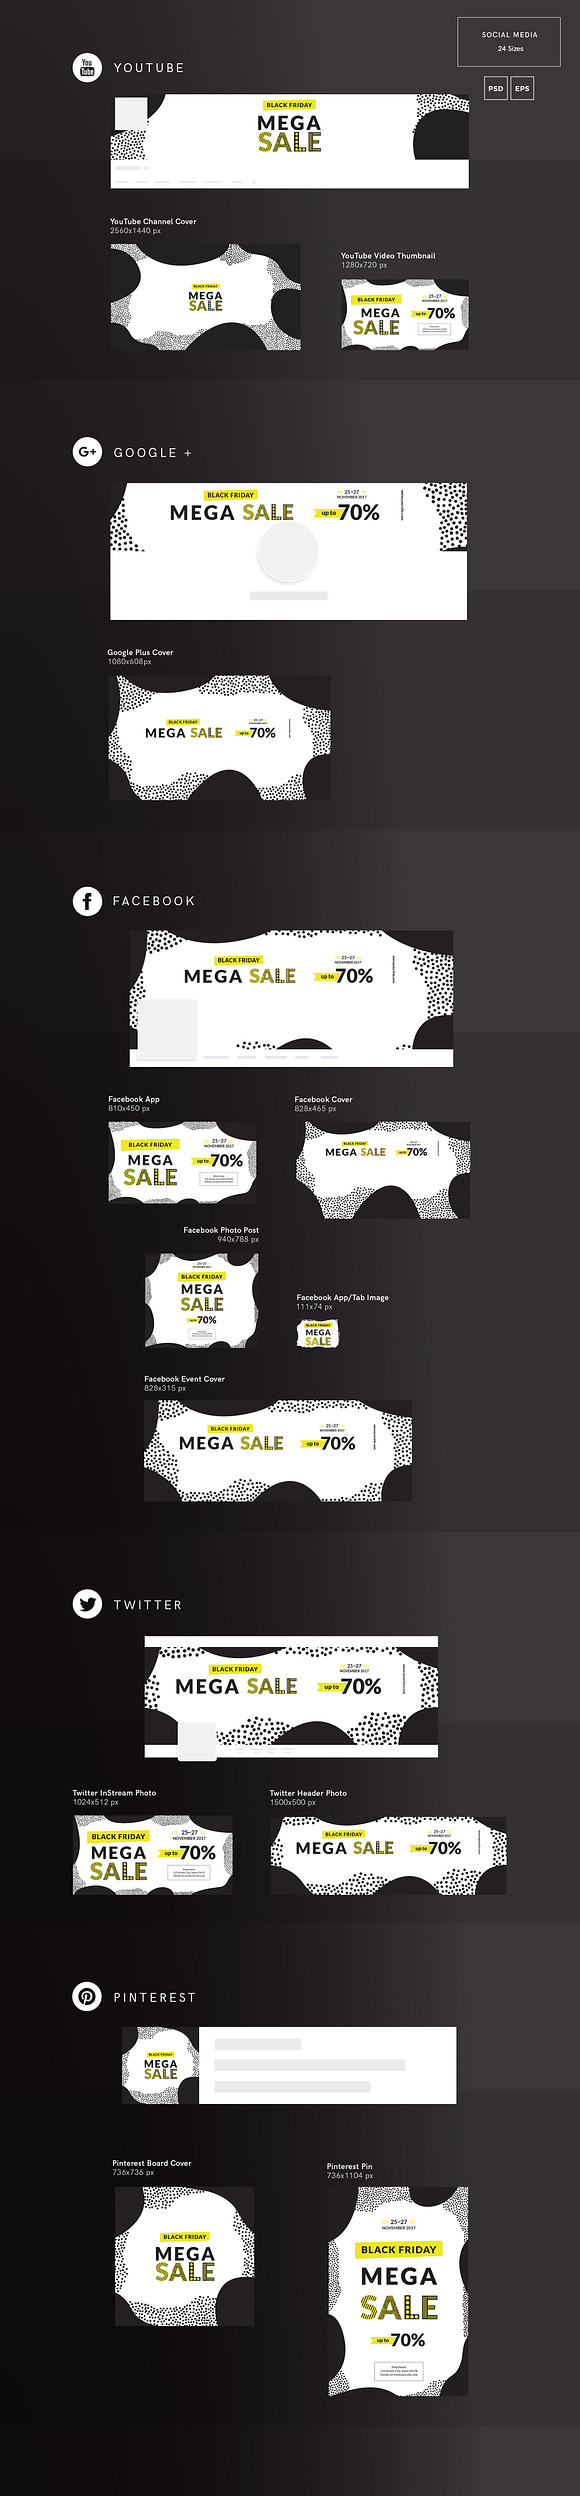 Social Media Pack | Black Friday in Social Media Templates - product preview 1